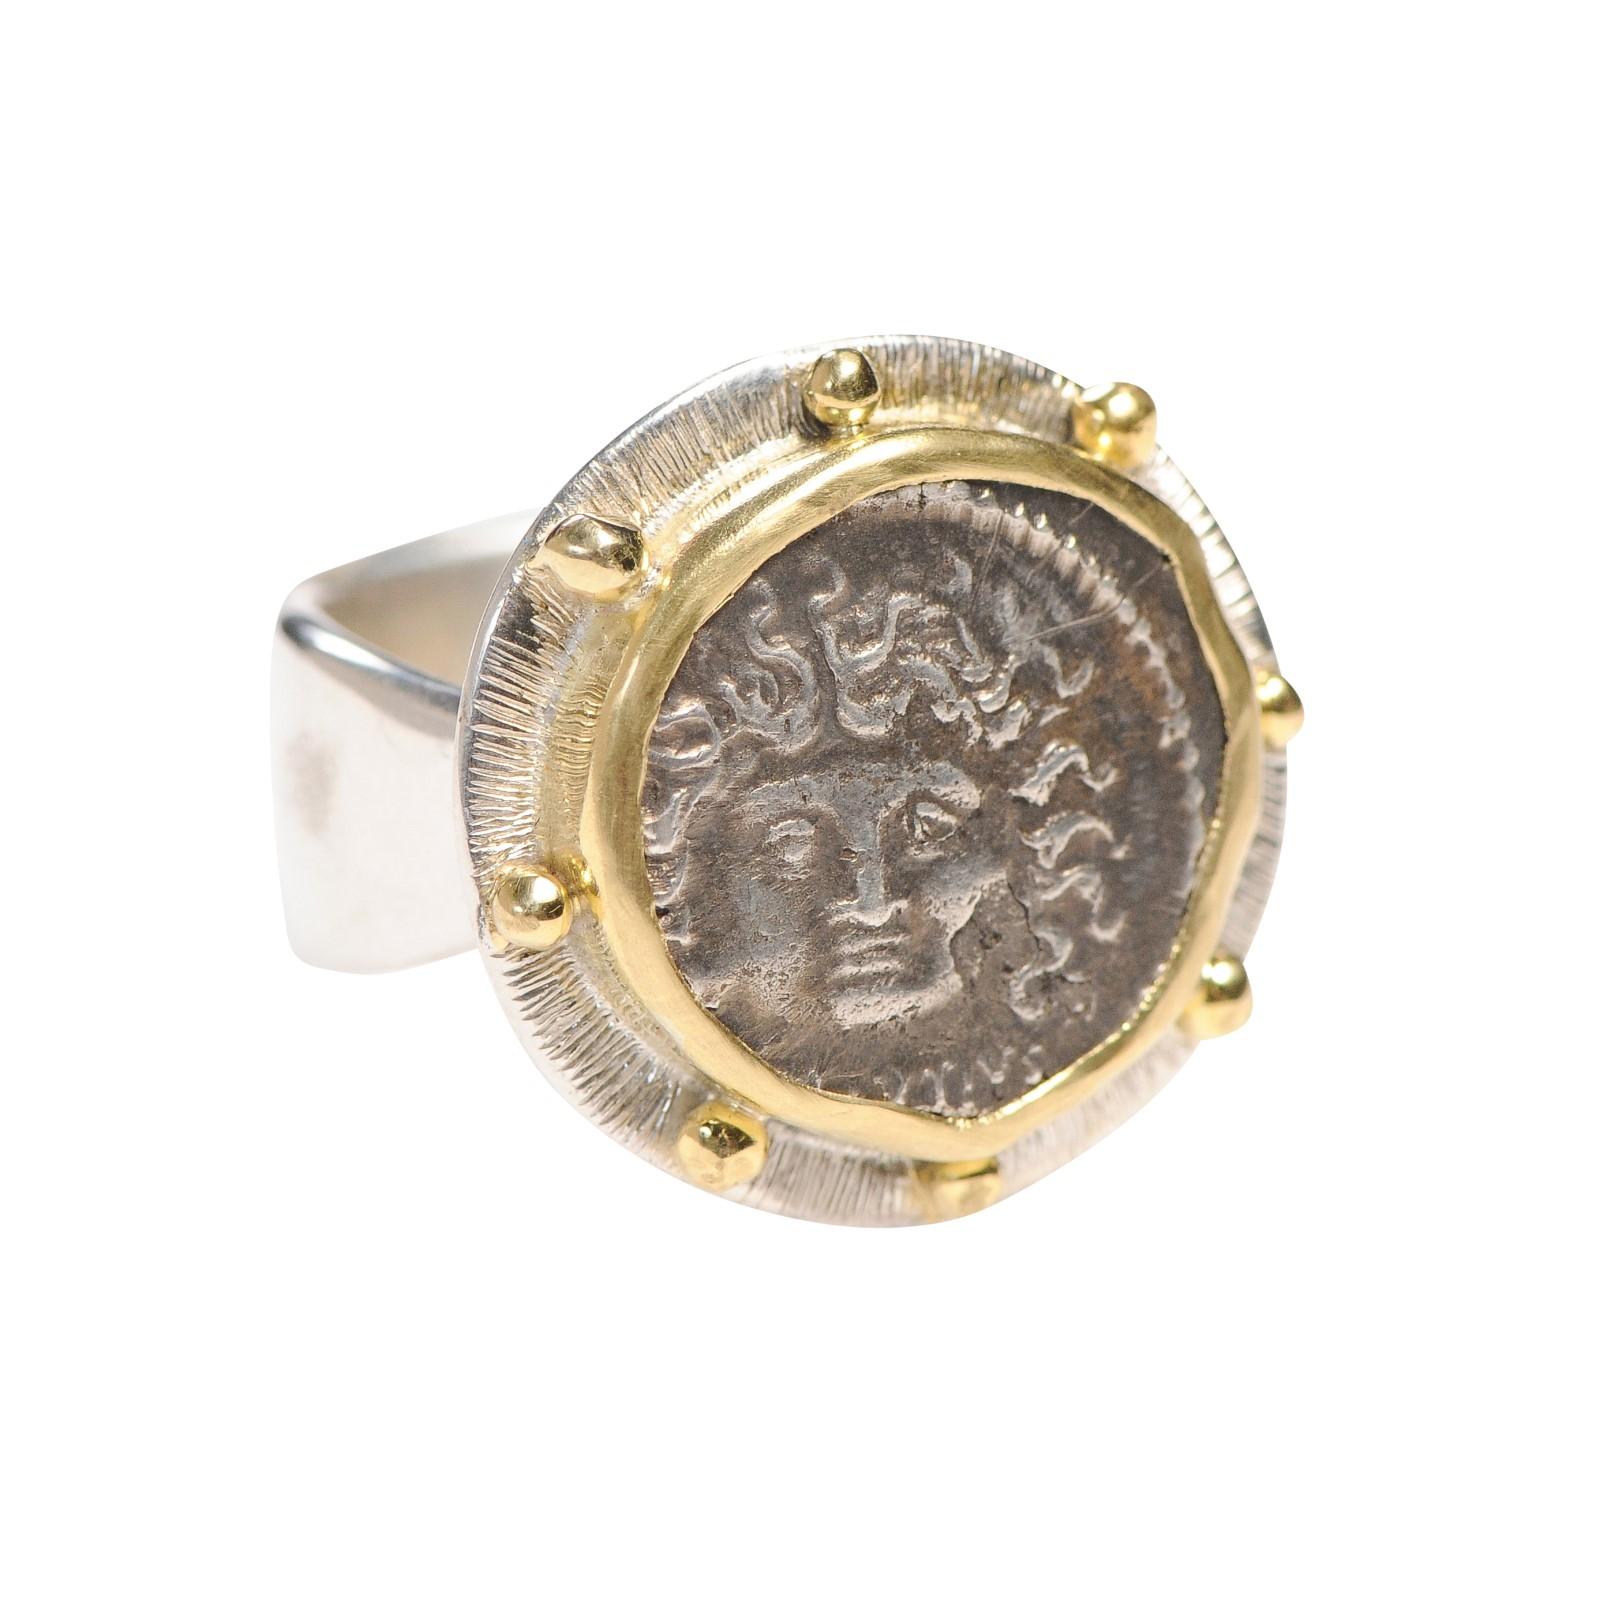 An authentic L. Plautius Plancus, Silver Denarius Coin (47 BC) ring. This Greek coin with Head of Medusa featured prominently has been set in a custom custom ring with a 18k gold and sterling silver bezel (with balled accents) and a sterling silver